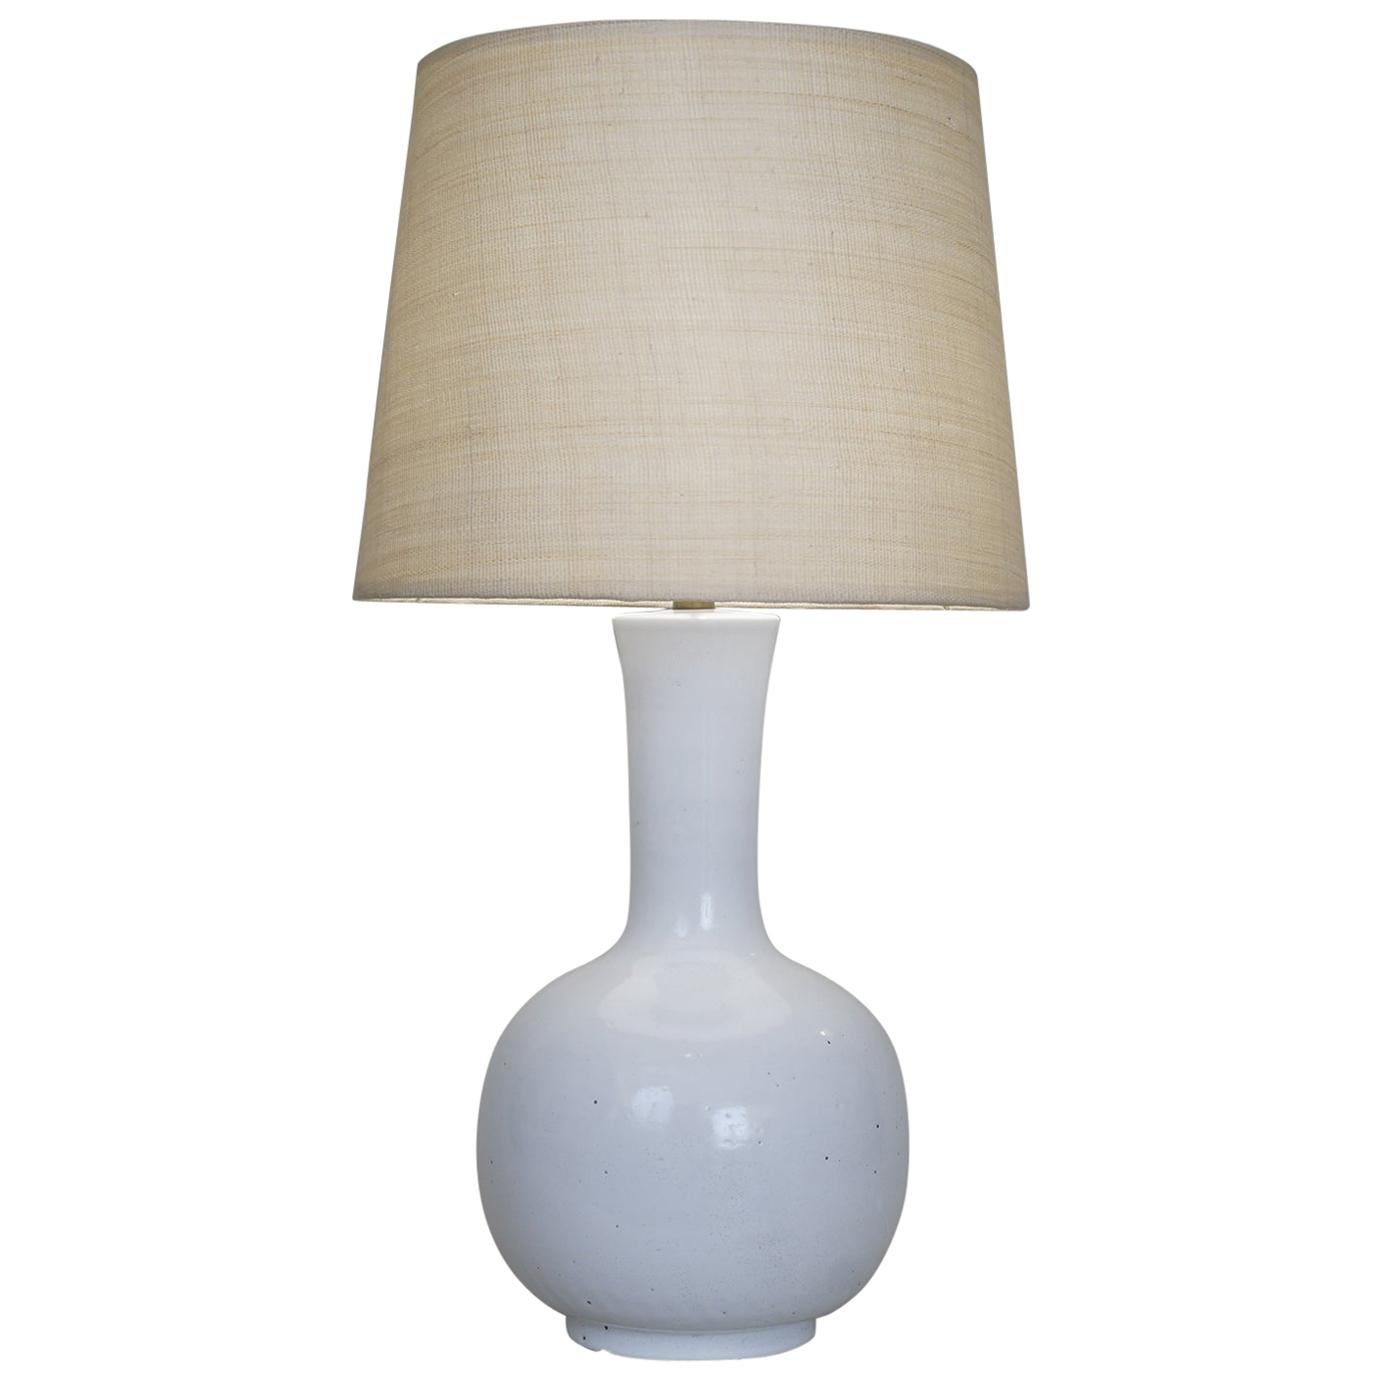 Late 20th Century White Enameled Ceramic Table Lamp For Sale